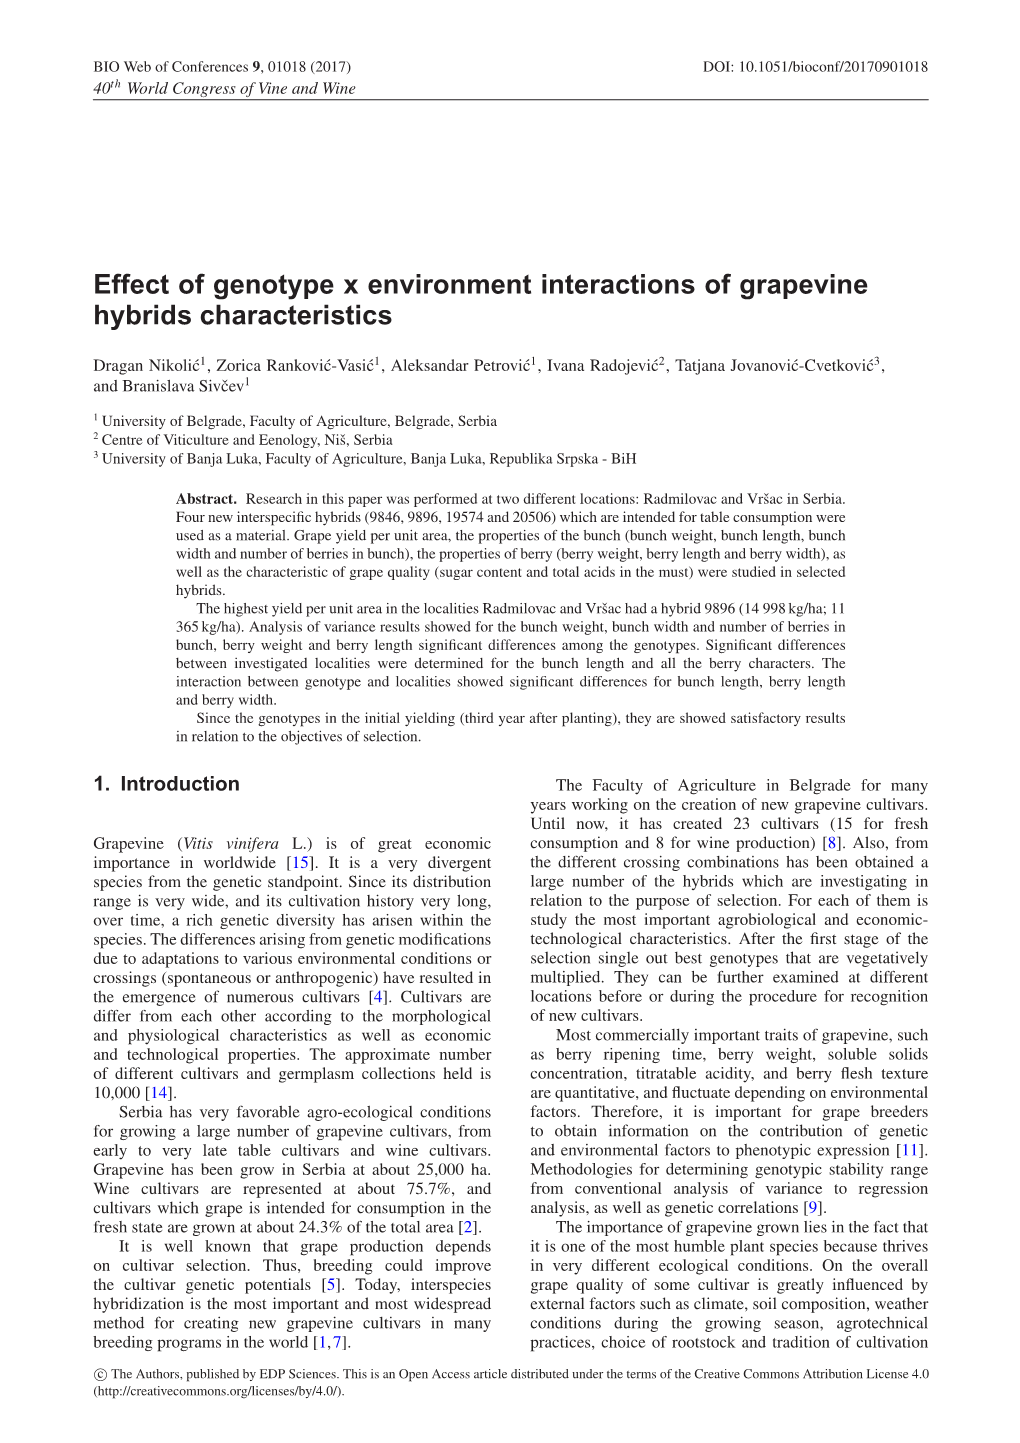 Effect of Genotype X Environment Interactions of Grapevine Hybrids Characteristics